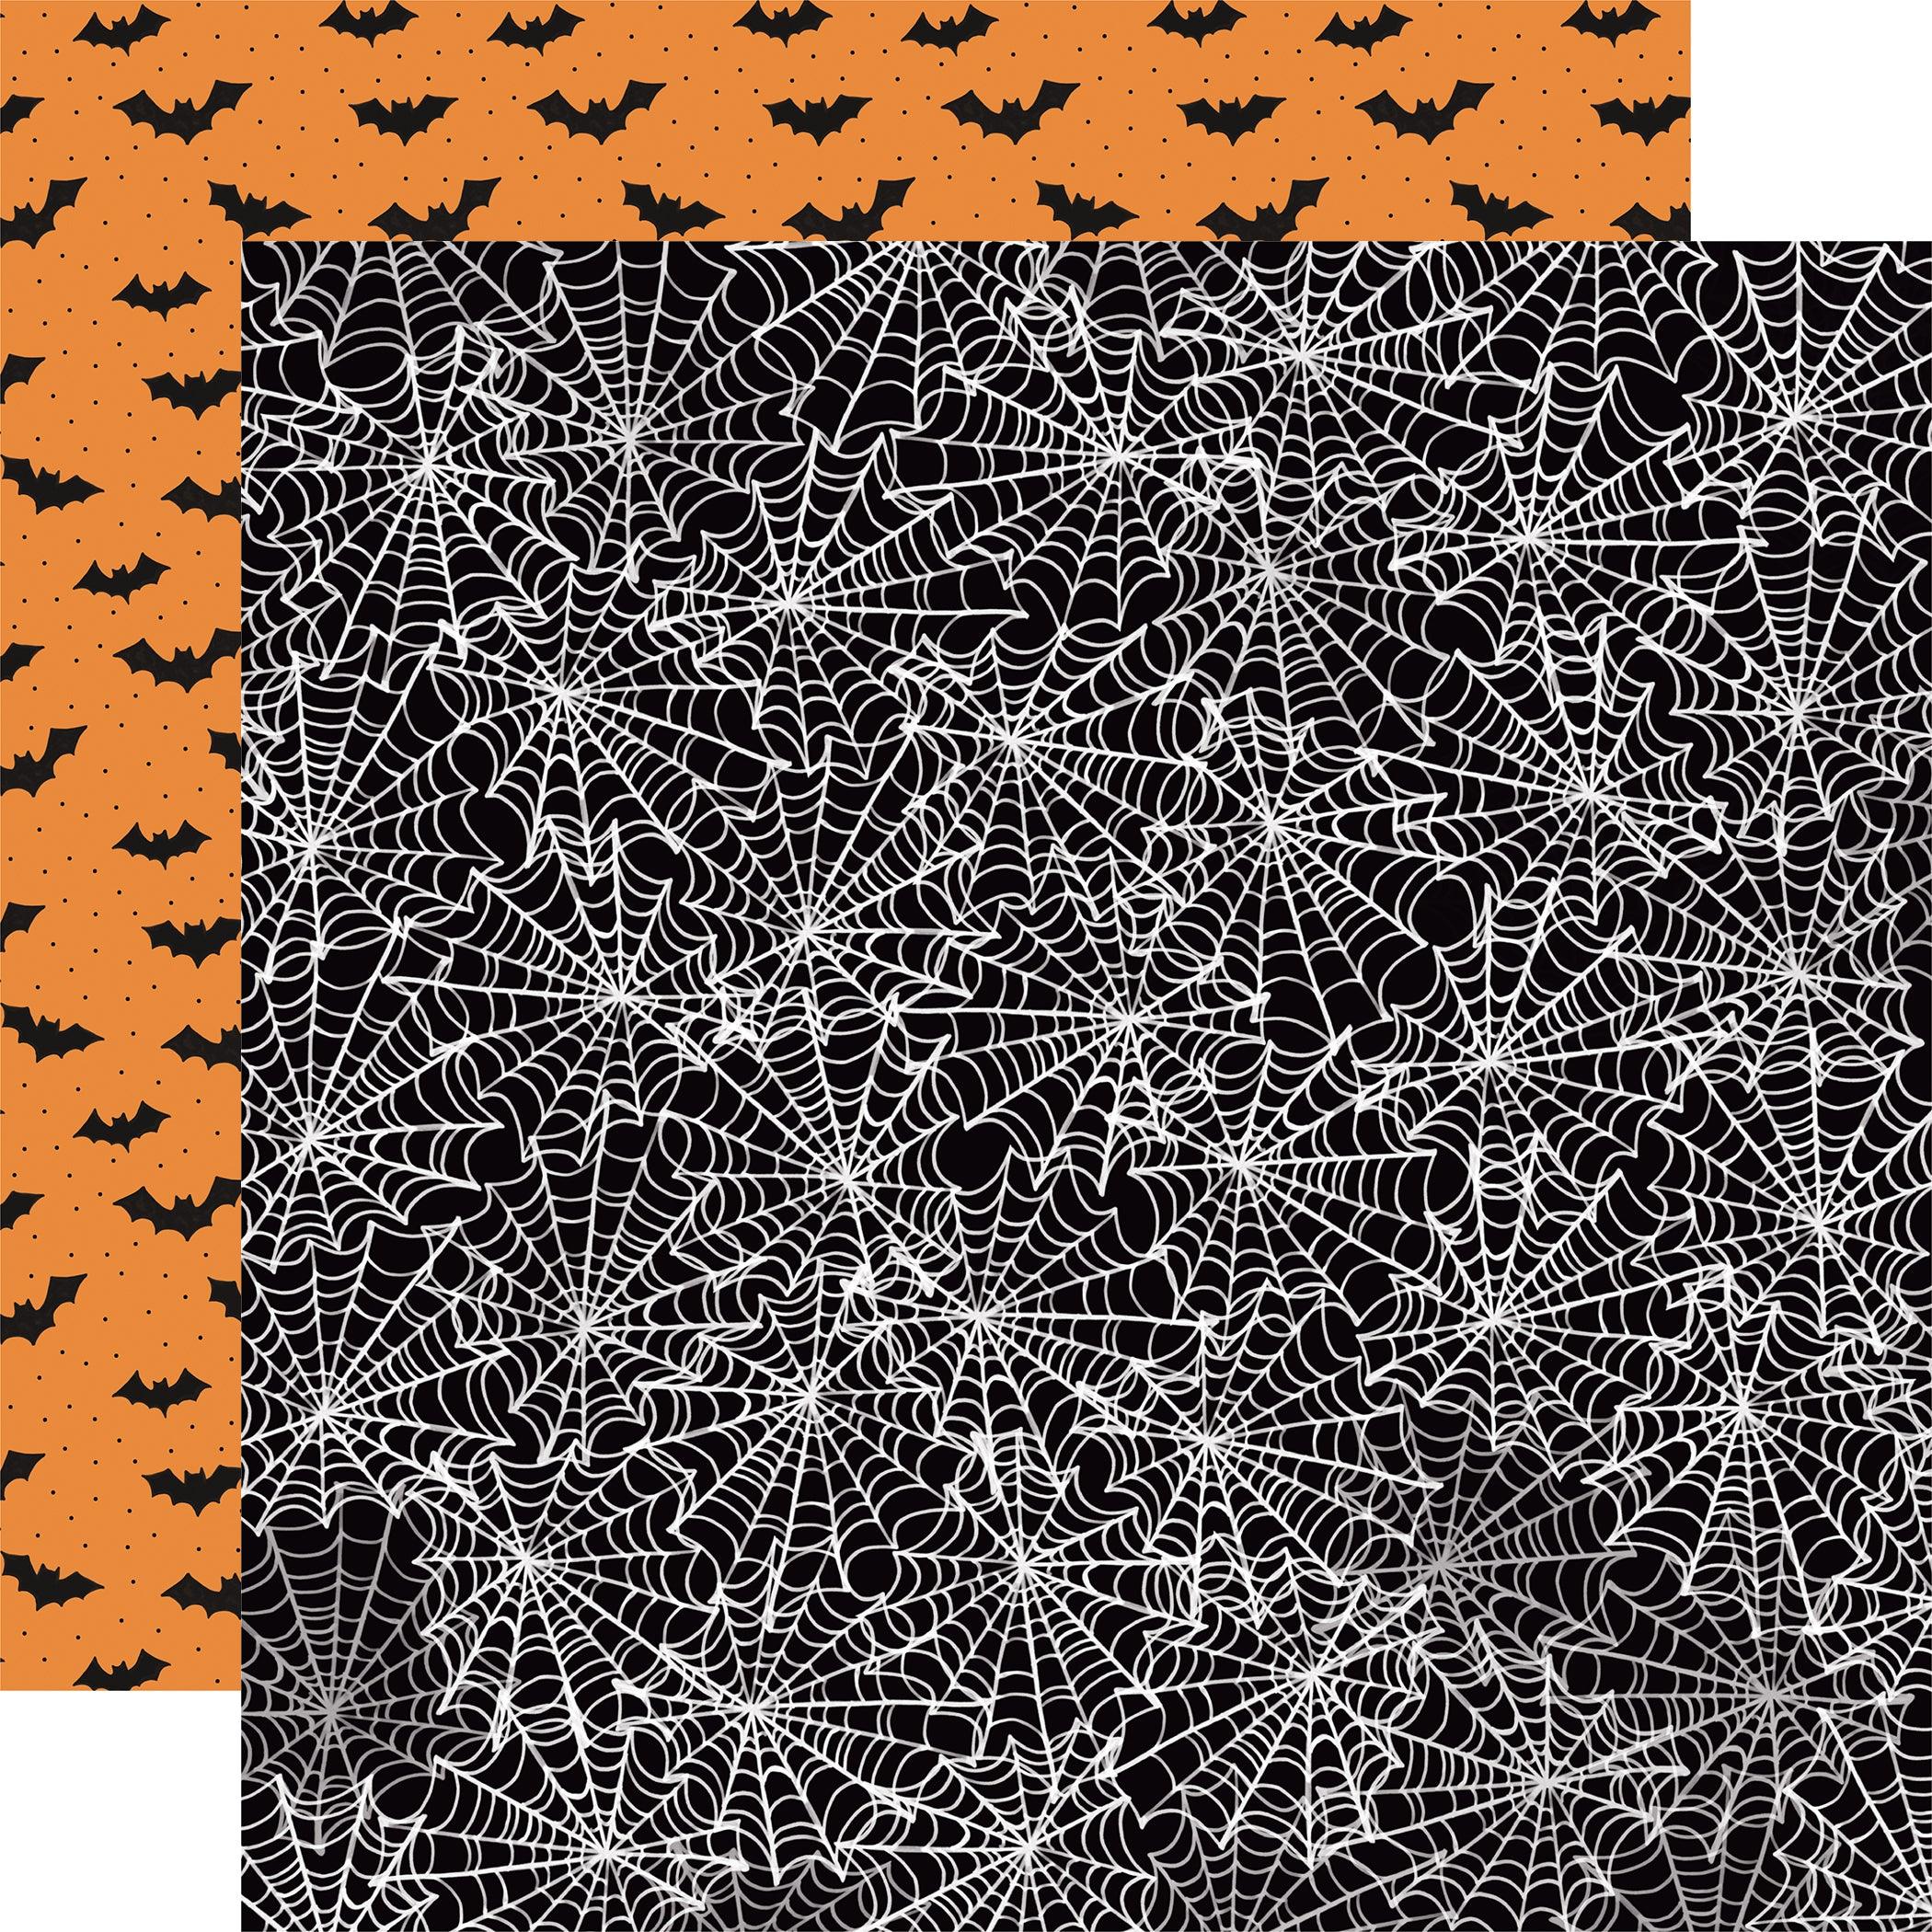 Halloween Collection Winding Webs 12 x 12 Double-Sided Scrapbook Paper by Carta Bella - Scrapbook Supply Companies